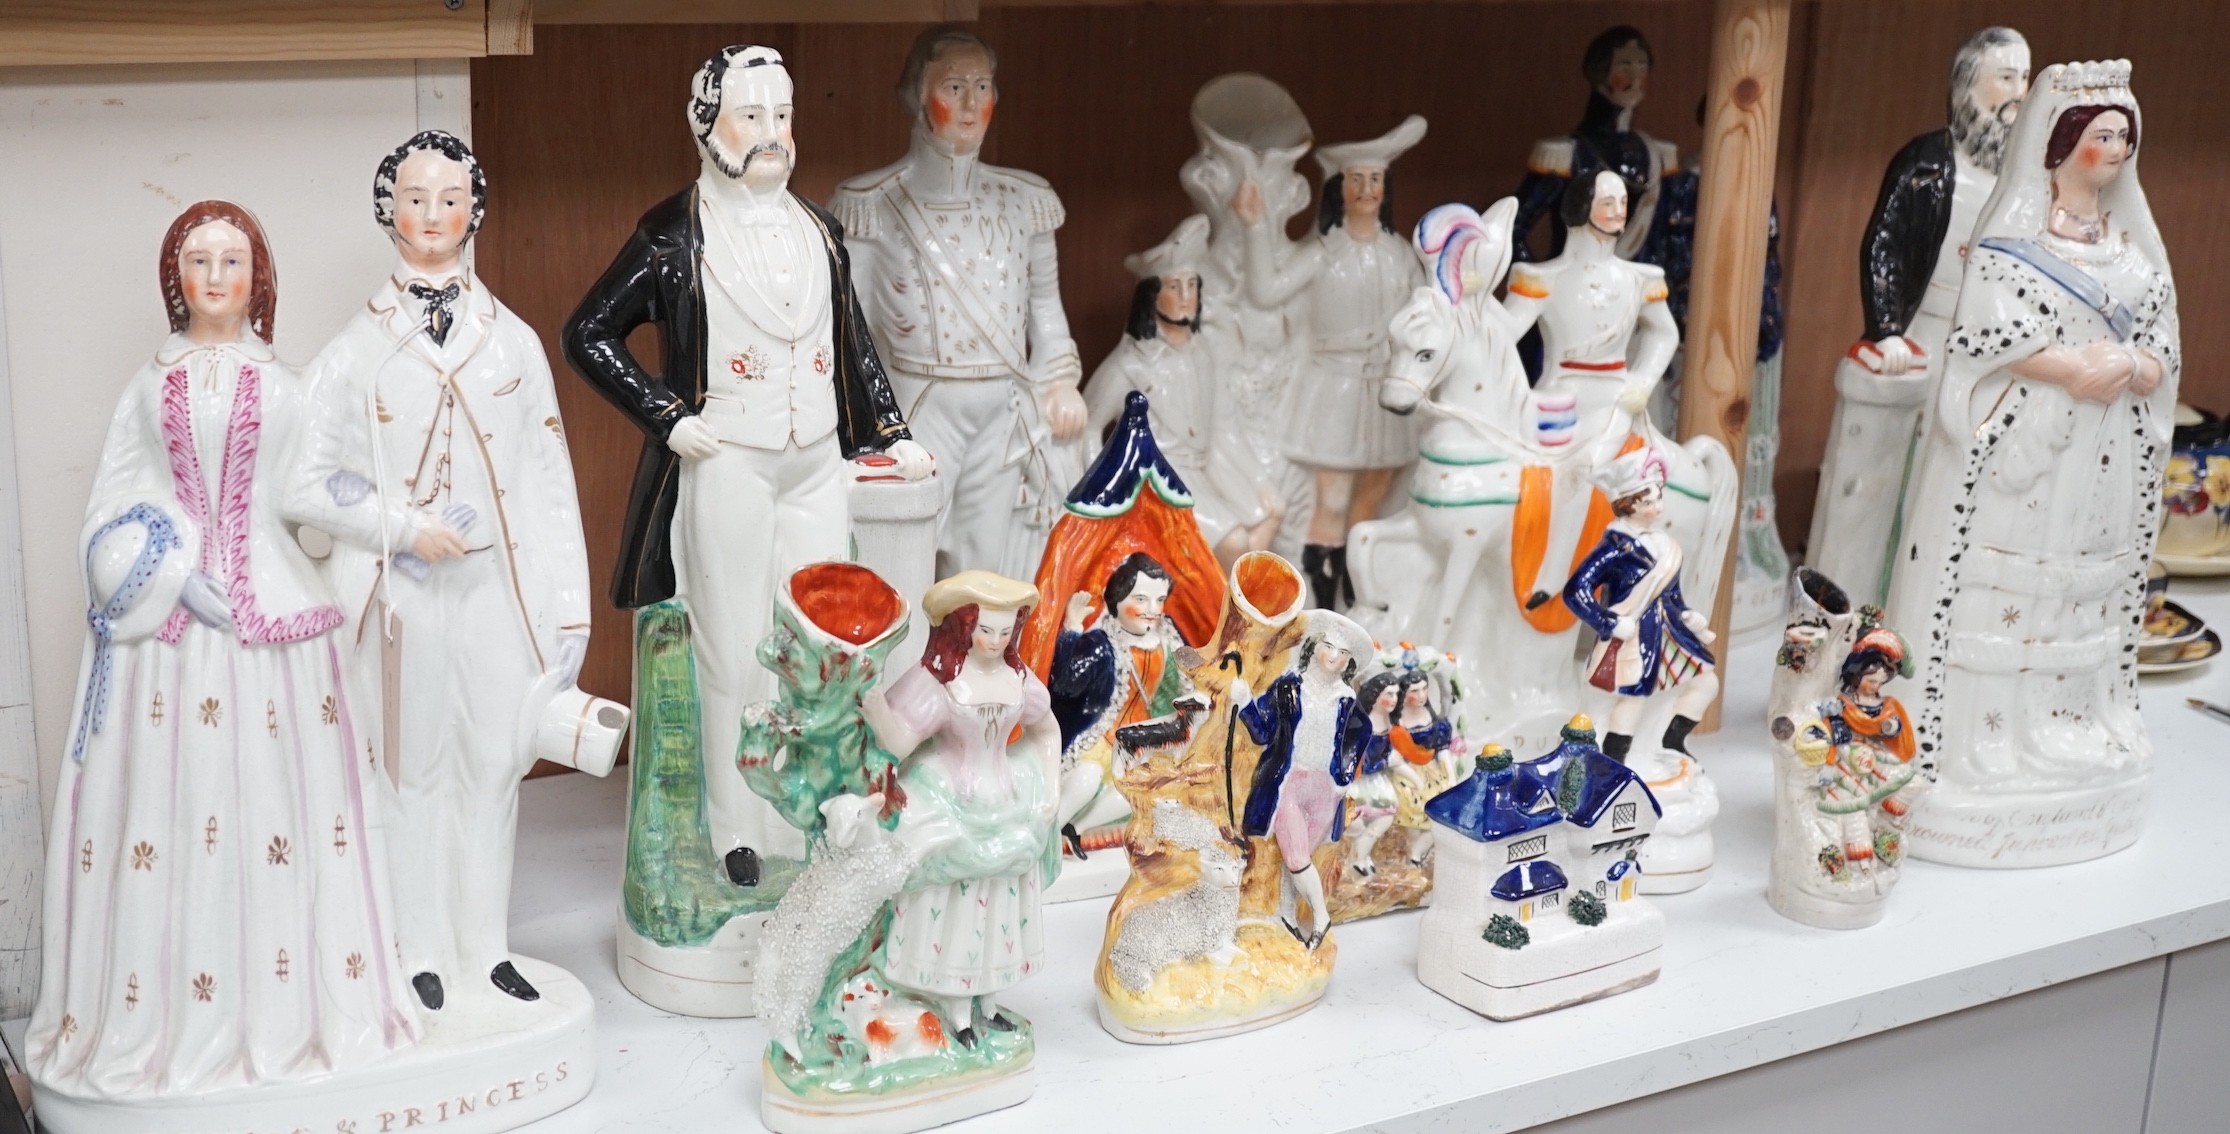 A collection of mostly 19th century Staffordshire flatbacks, including Princess Royal and